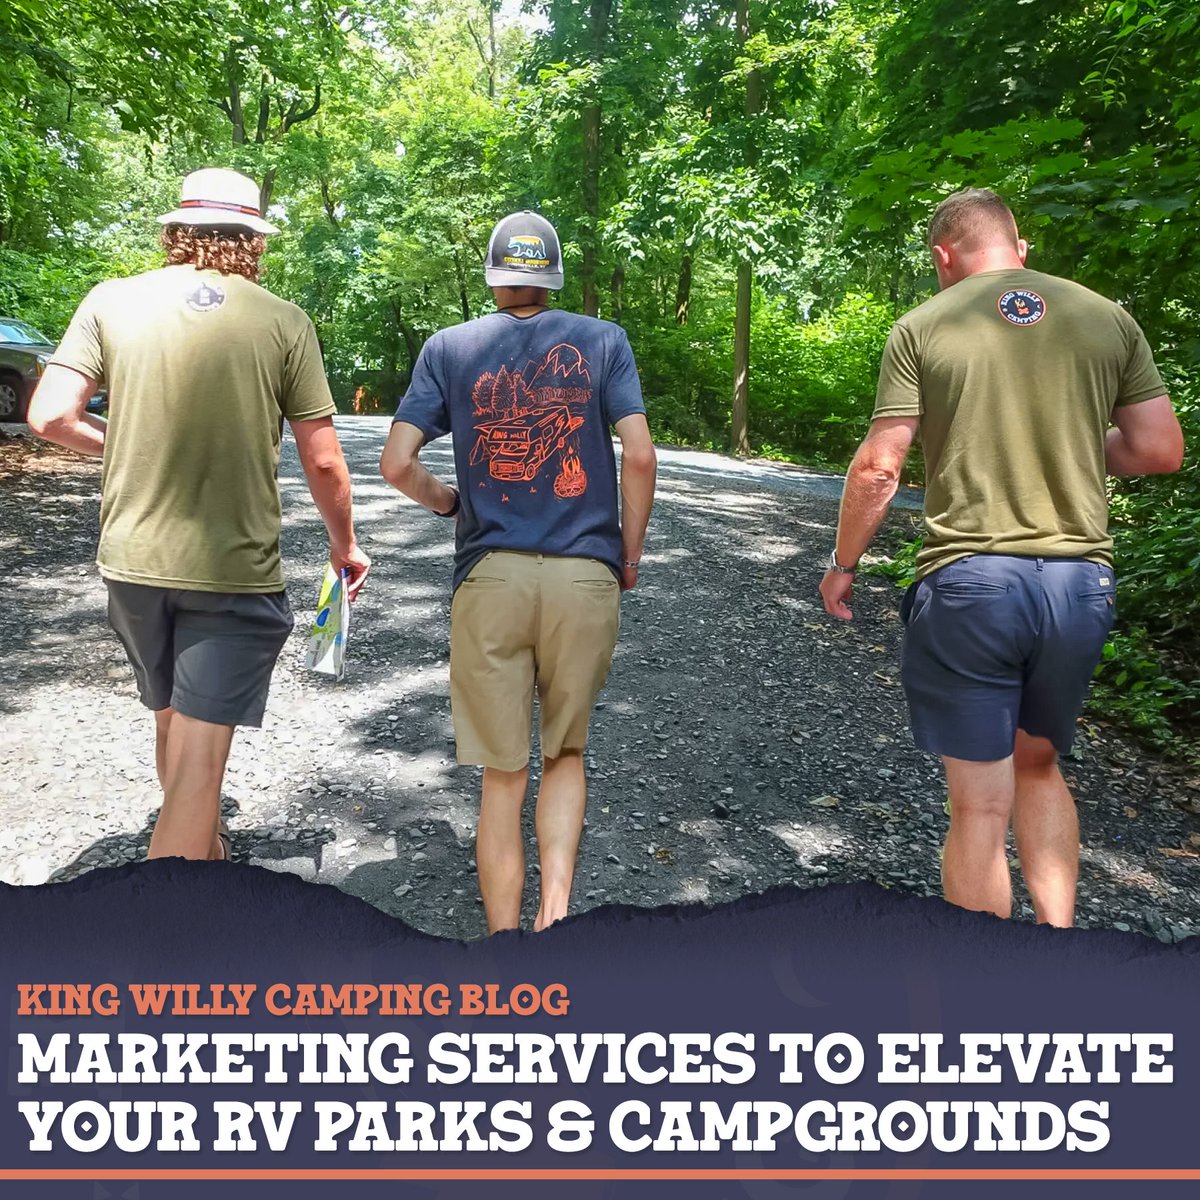 Check out our first blog and see how King WIlly Camping can help your campground reach its potential! 

kingwillycamping.com/marketing-serv…

#Kingwillycamping #camping #campgroundmarketing #custommarketing #campground #googlepartner #googleads #campingblog #campingblogs